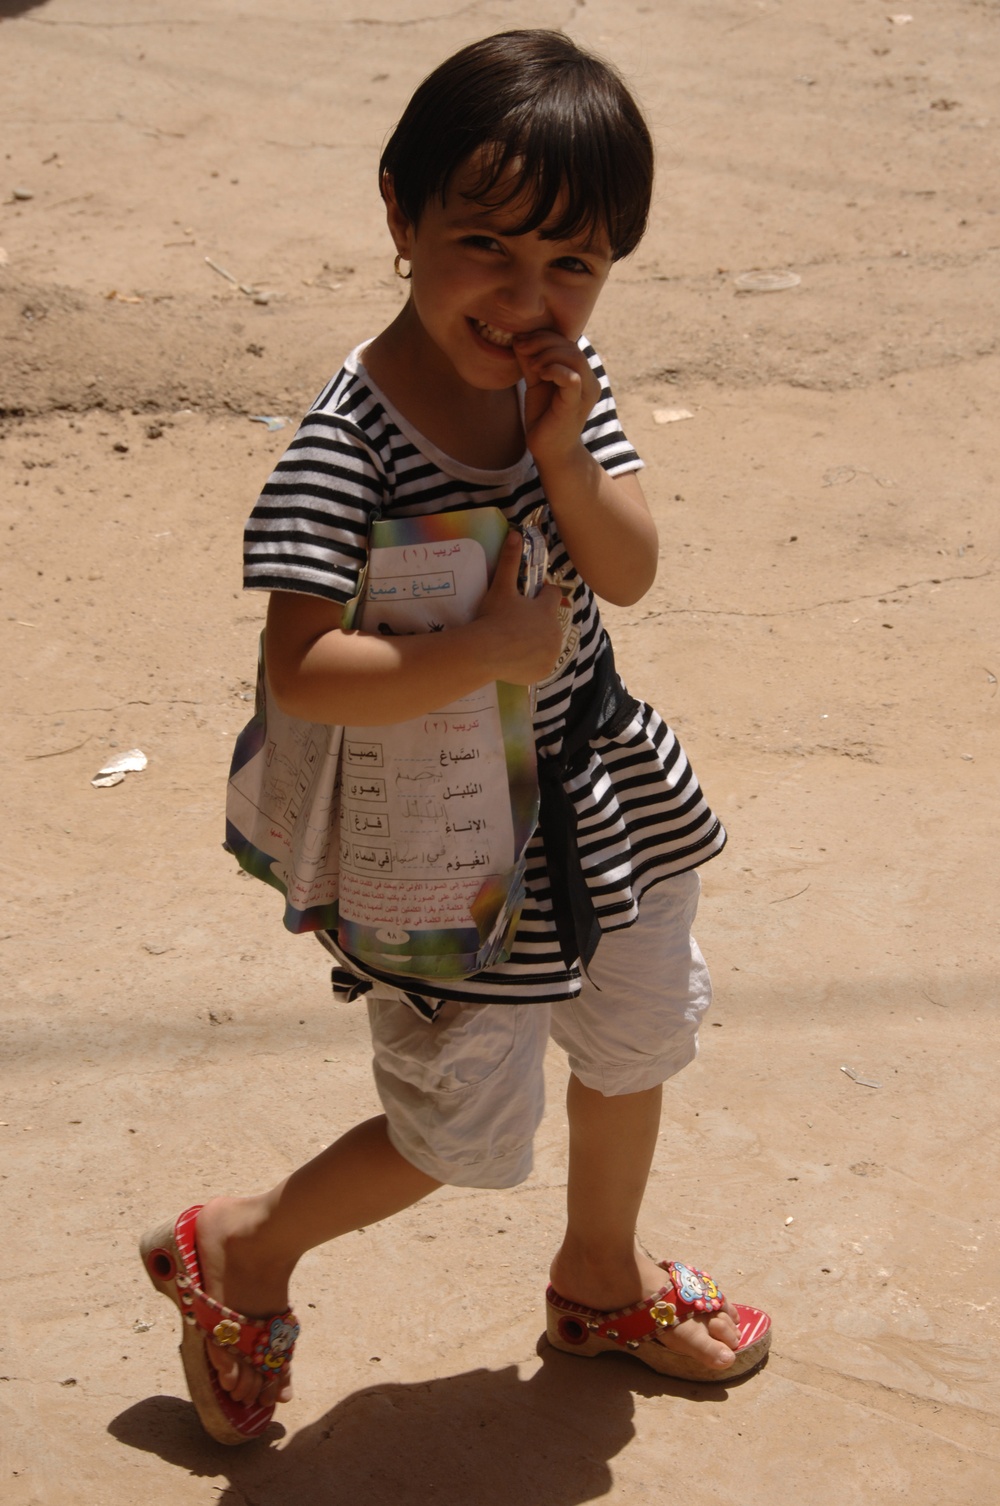 An Iraqi Child Smiles at Passing U.S. Soldiers